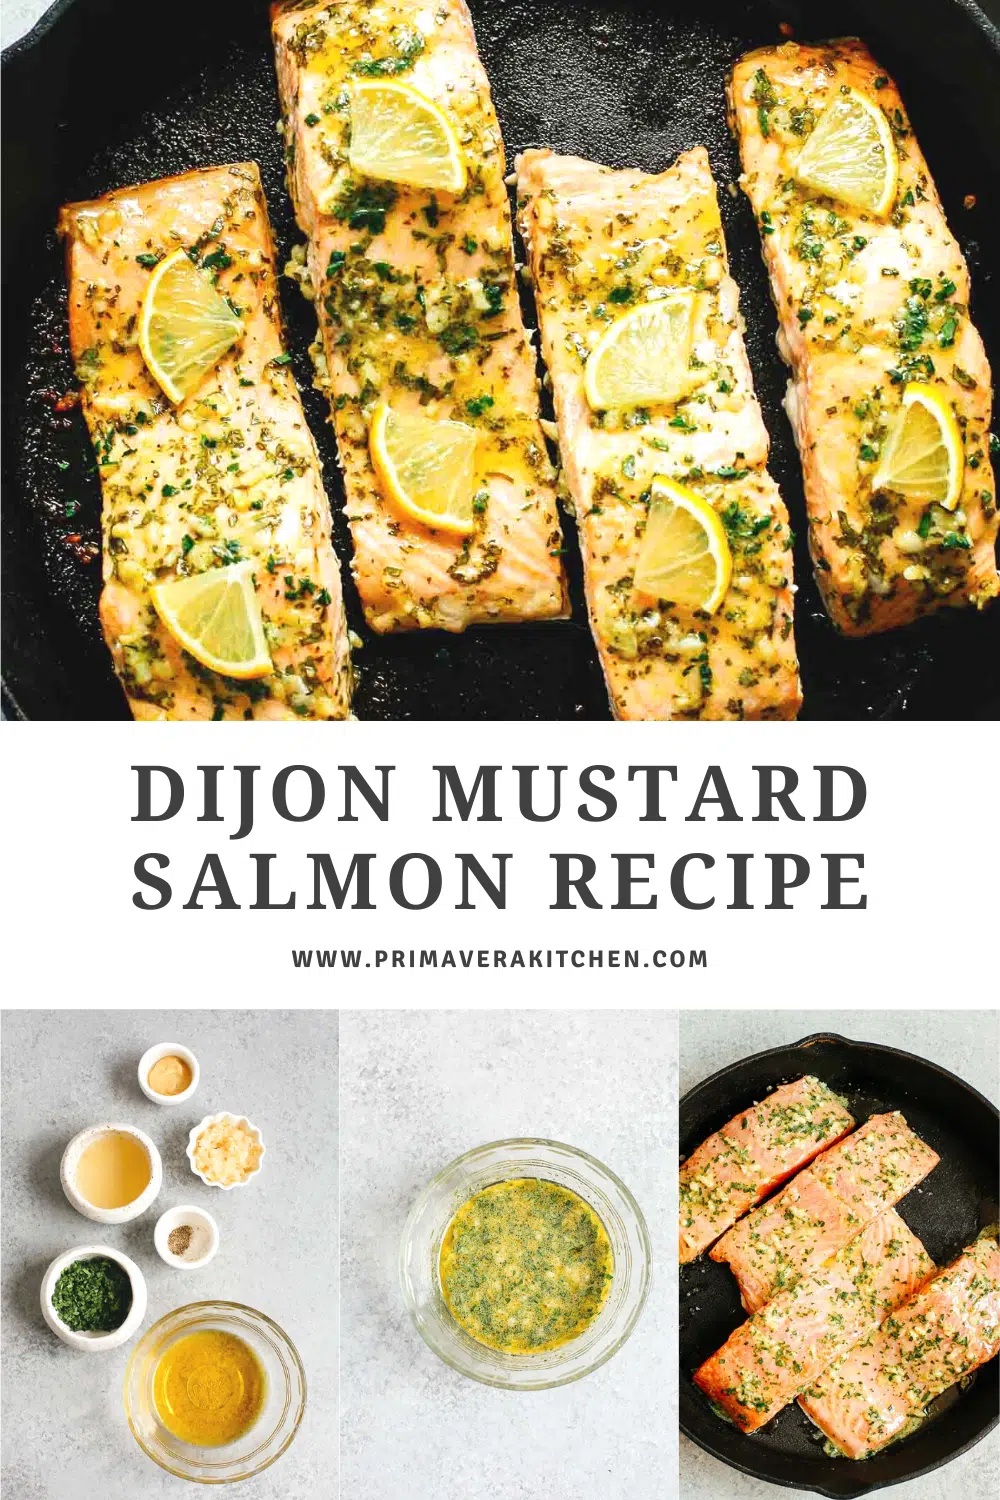 titled photo collage (and shown): Dijon Mustard Salmon Recipe 